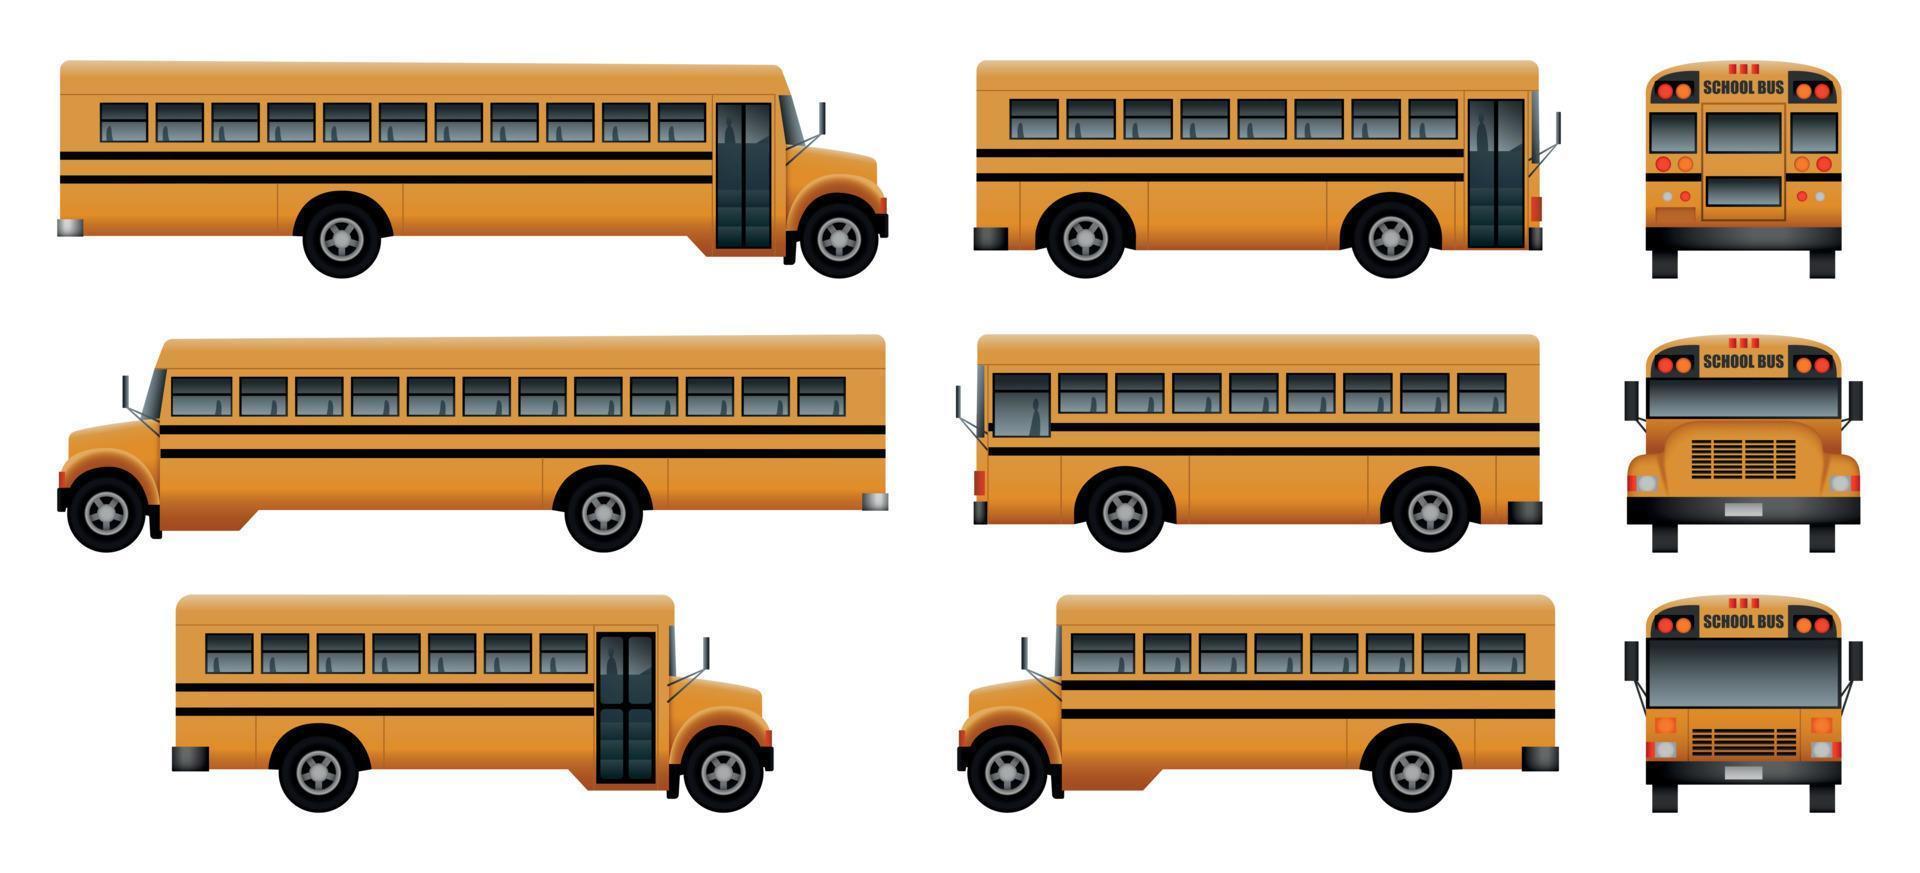 School bus back kids icons set, realistic style vector